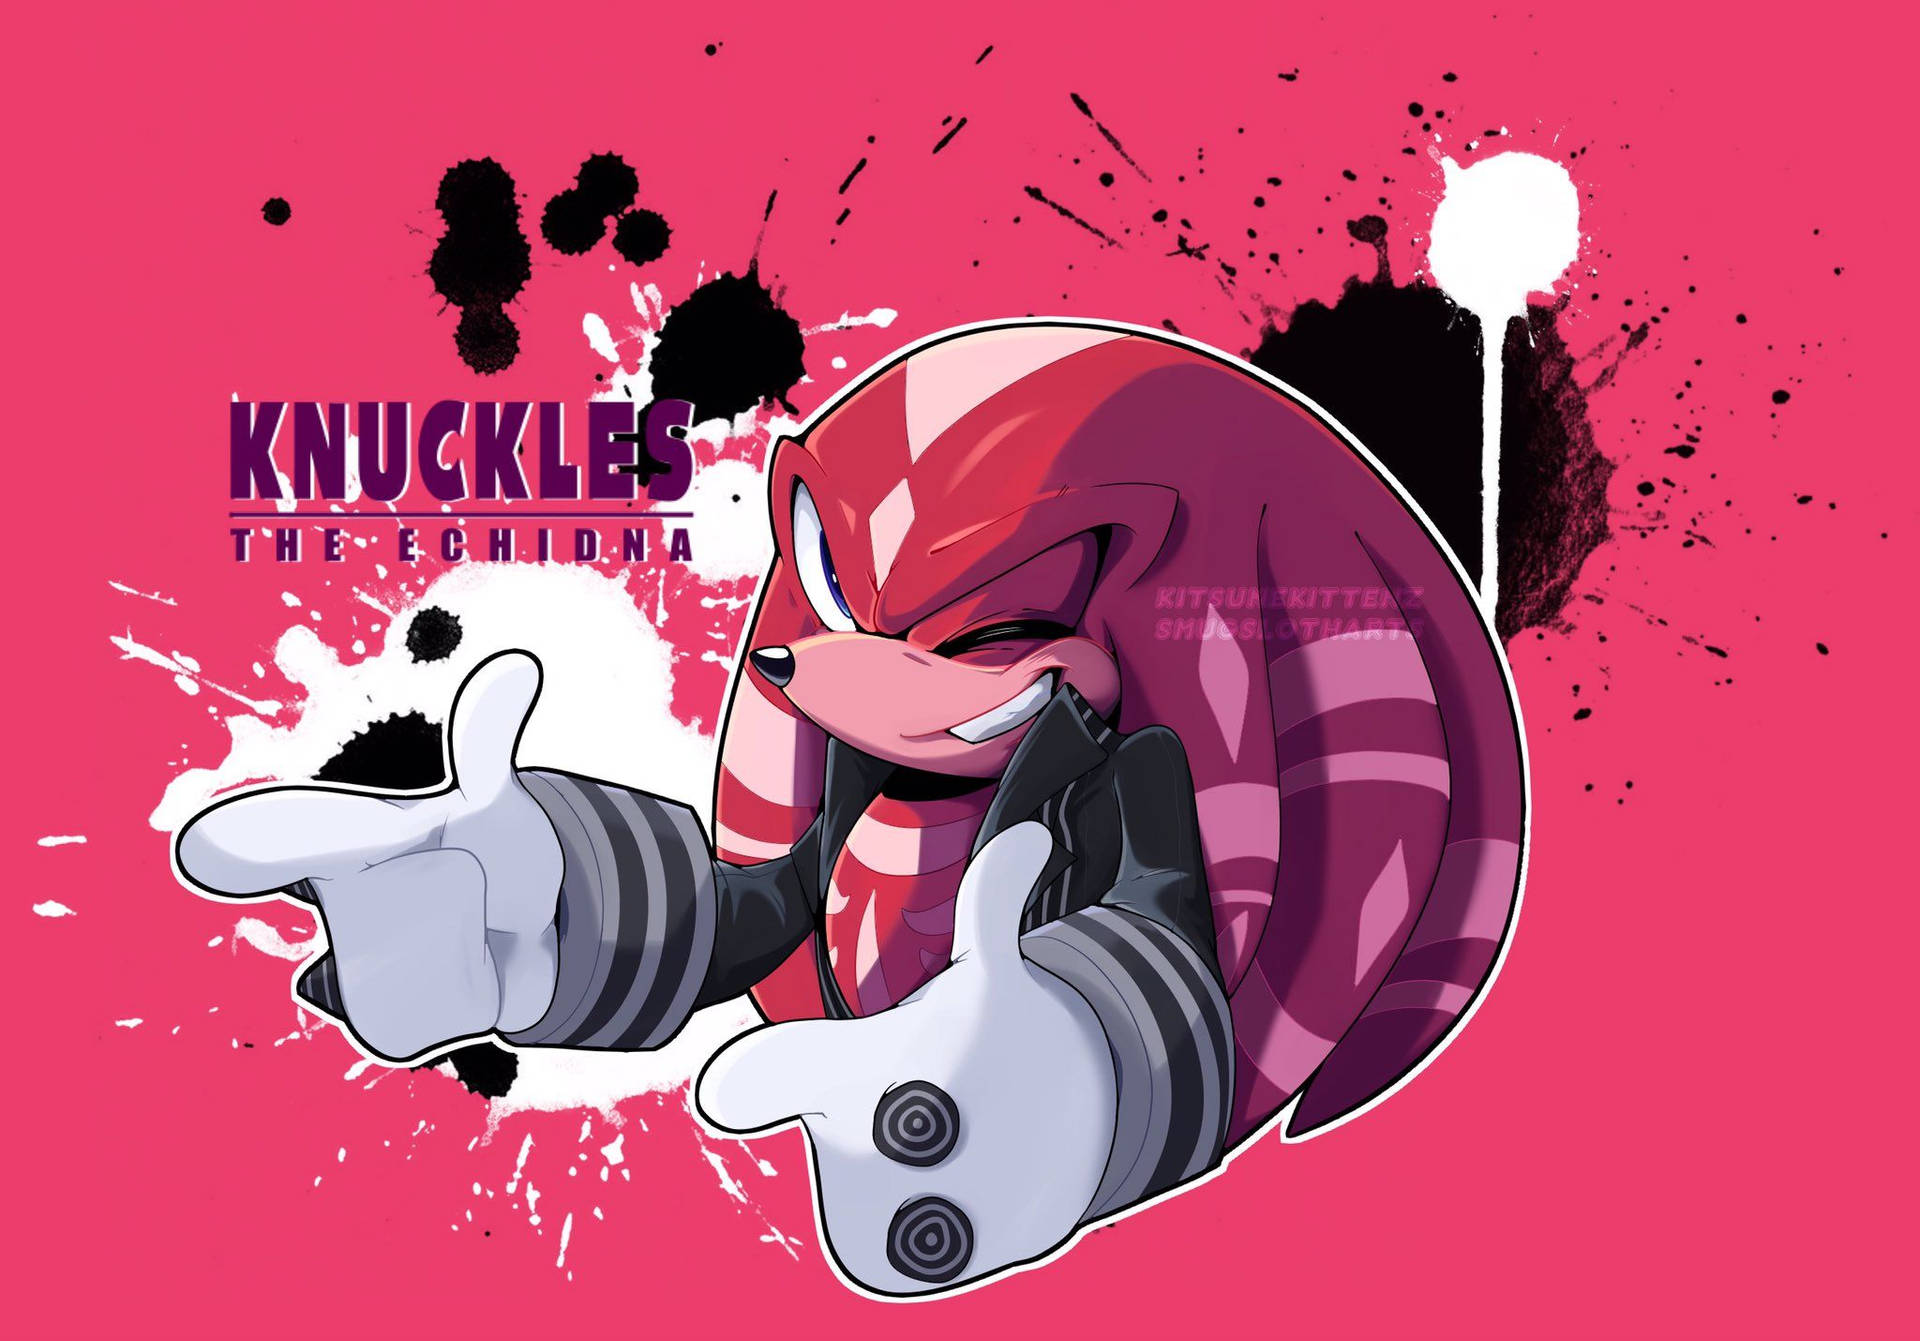 Stunning Illustration of Knuckles The Echidna in Pink Tone Wallpaper